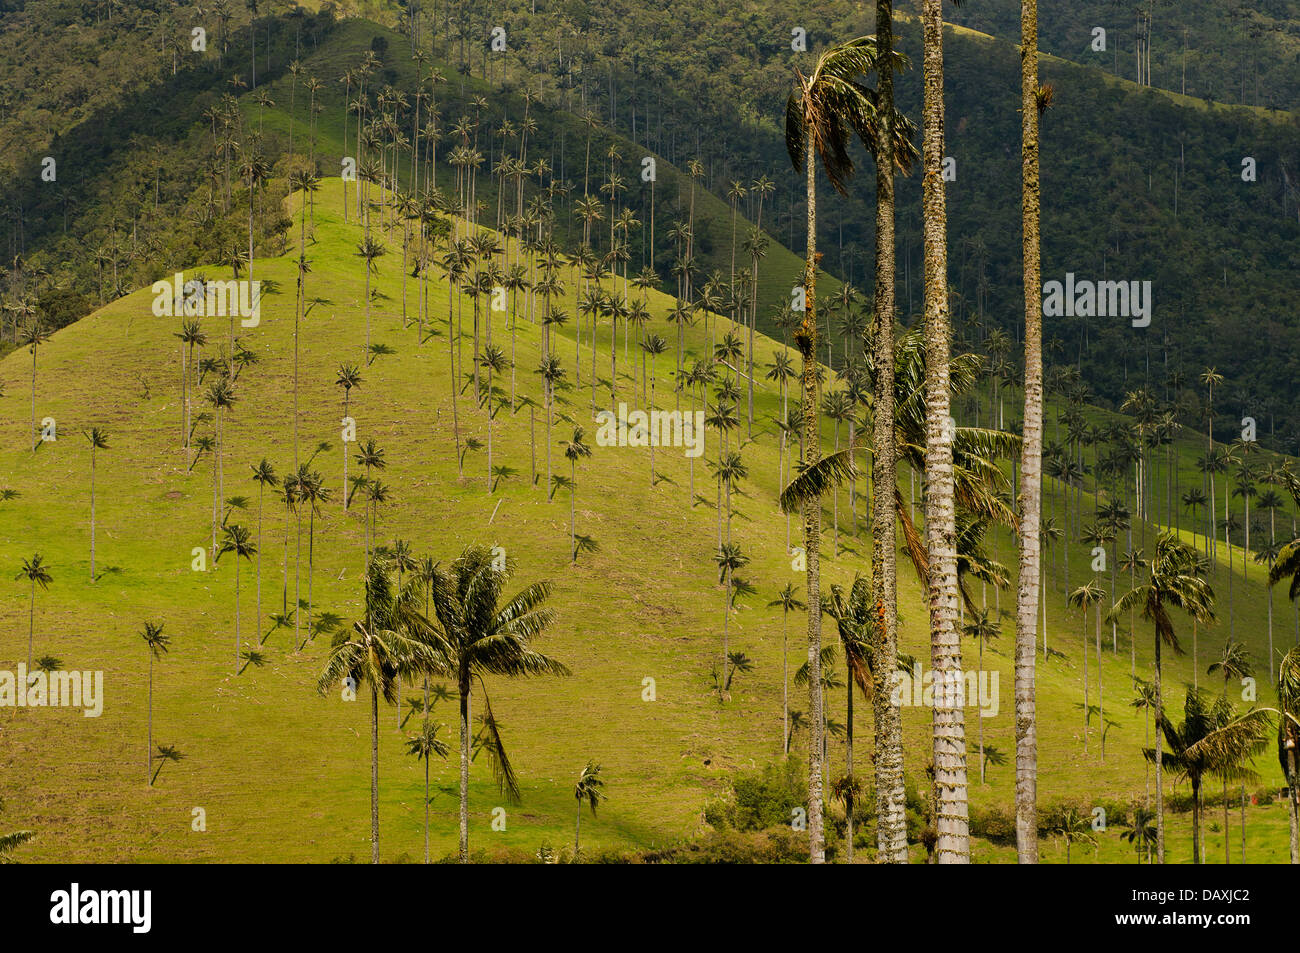 Wax palm trees of Cocora Valley, Colombia Stock Photo